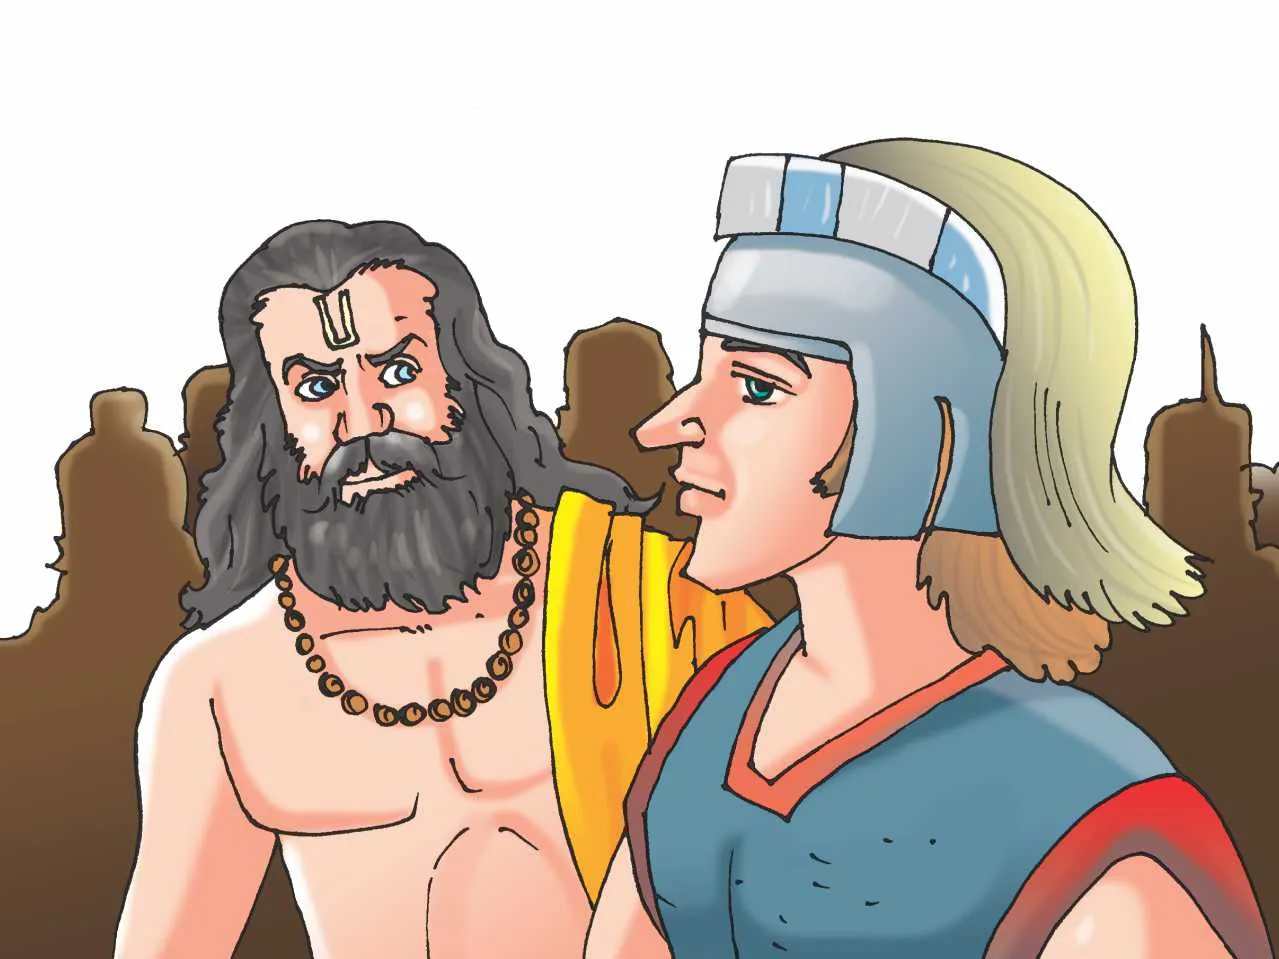 cartoon image of King with a saint